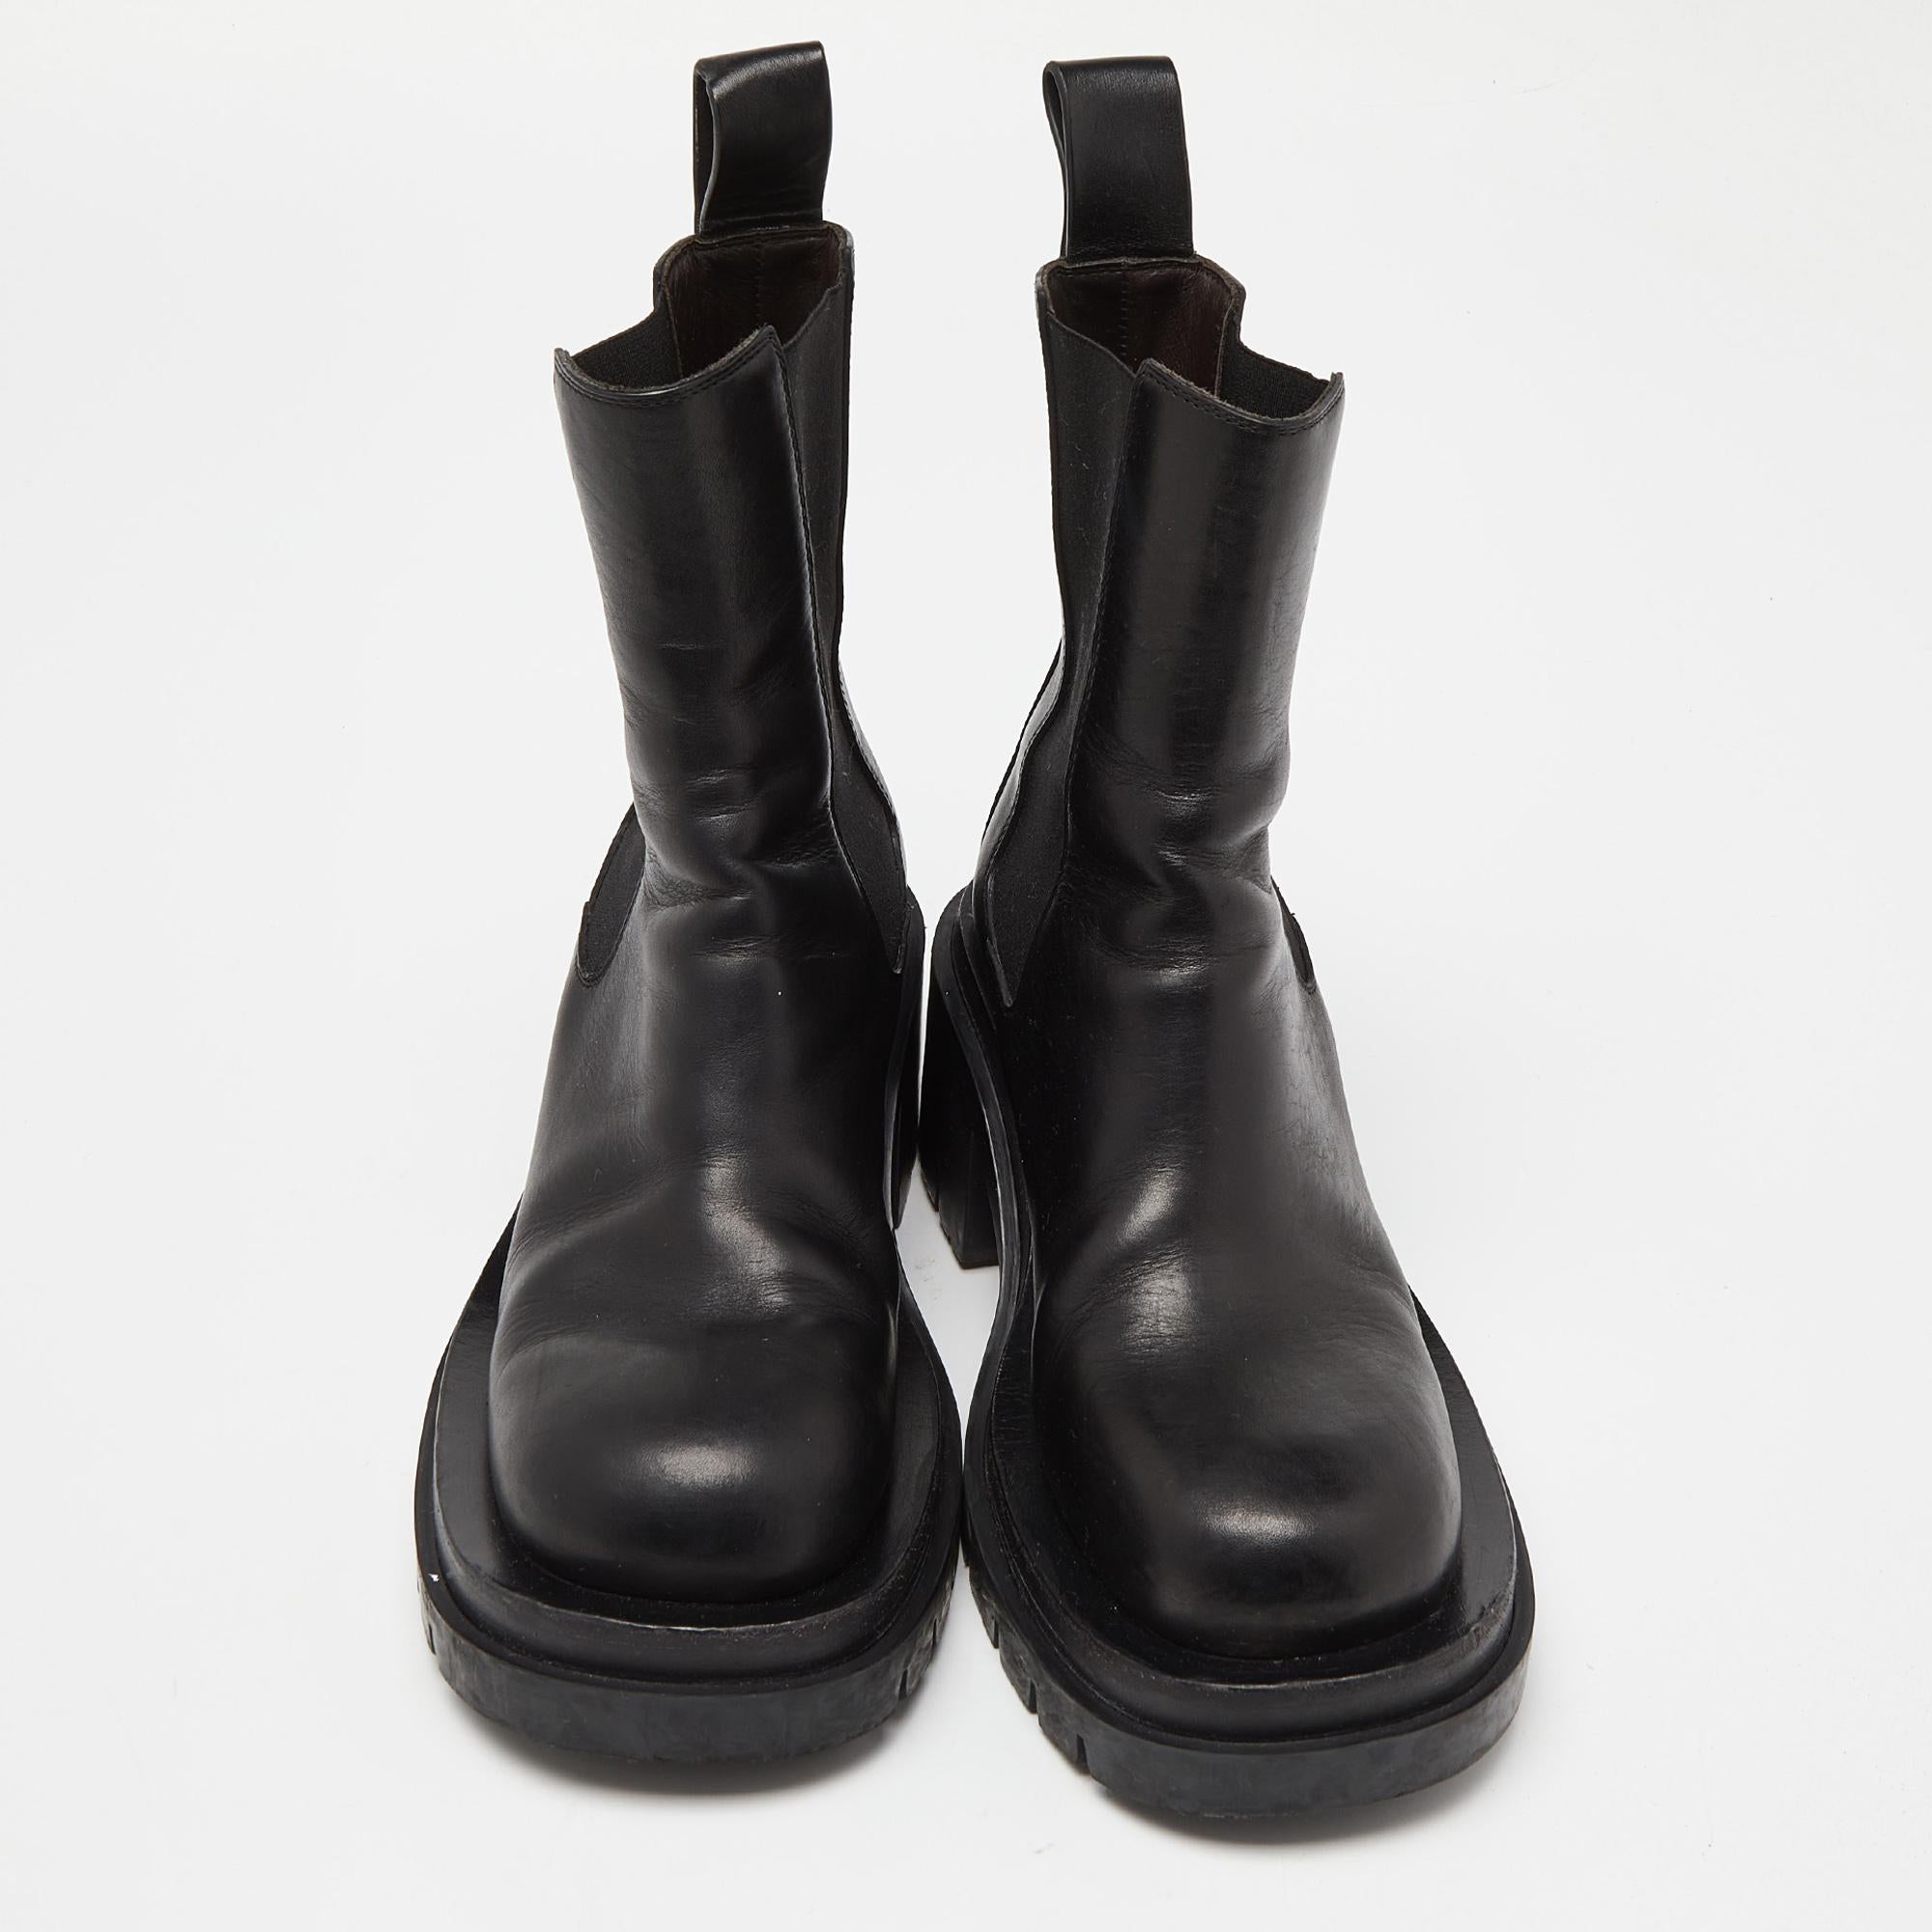 Enjoy the most fashionable days with these stylish Bottega Veneta black boots. Modern in design and craftsmanship, they are fashioned to keep you comfortable and chic!

Includes

Original Dustbag, Original Box